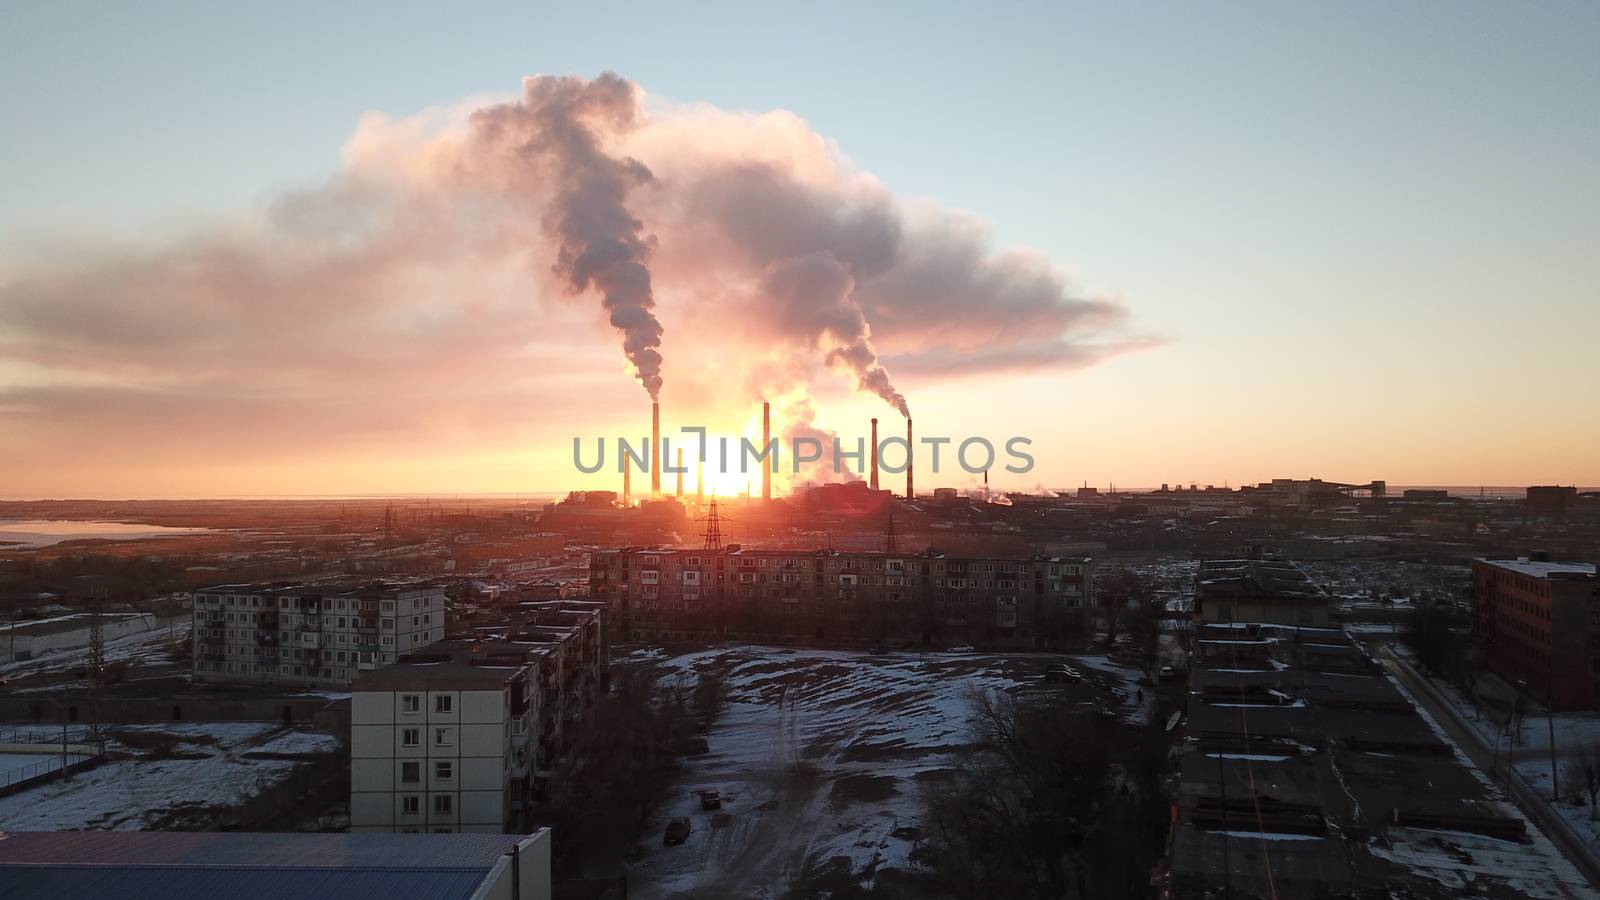 Epic sunset on the background of a Smoking factory. The red sun with bright rays goes beyond the pipe factories and smog. Shooting with the drone. View of part of the city, lake and industry. Red sky